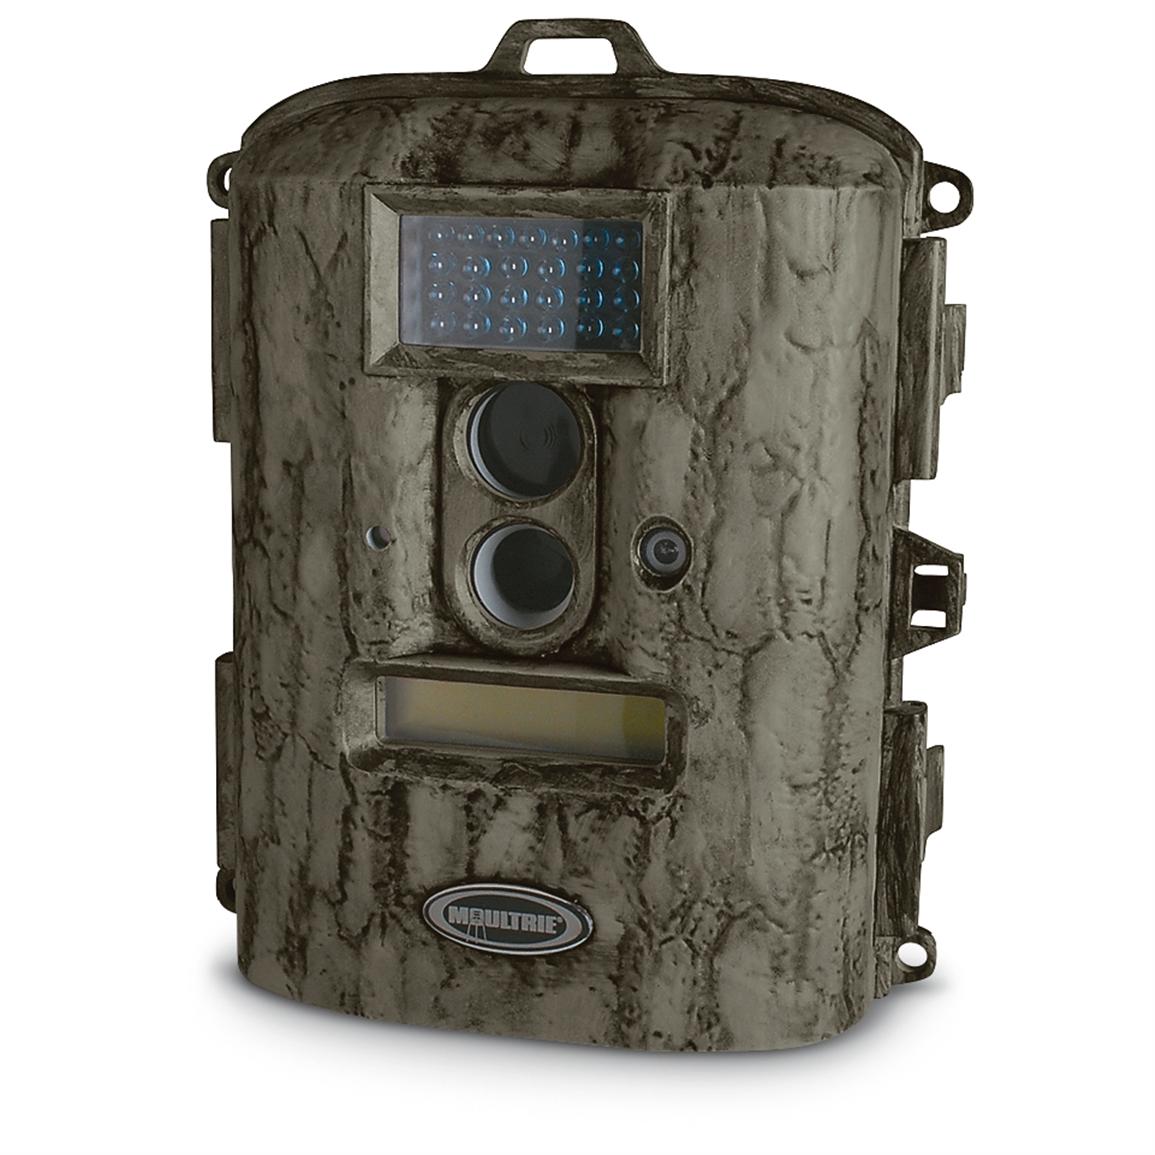 Moultrie® Game Spy D-55 IR Game Camera (Refurbished)  Fast Infrared image capture catches any movement; Zoom in close